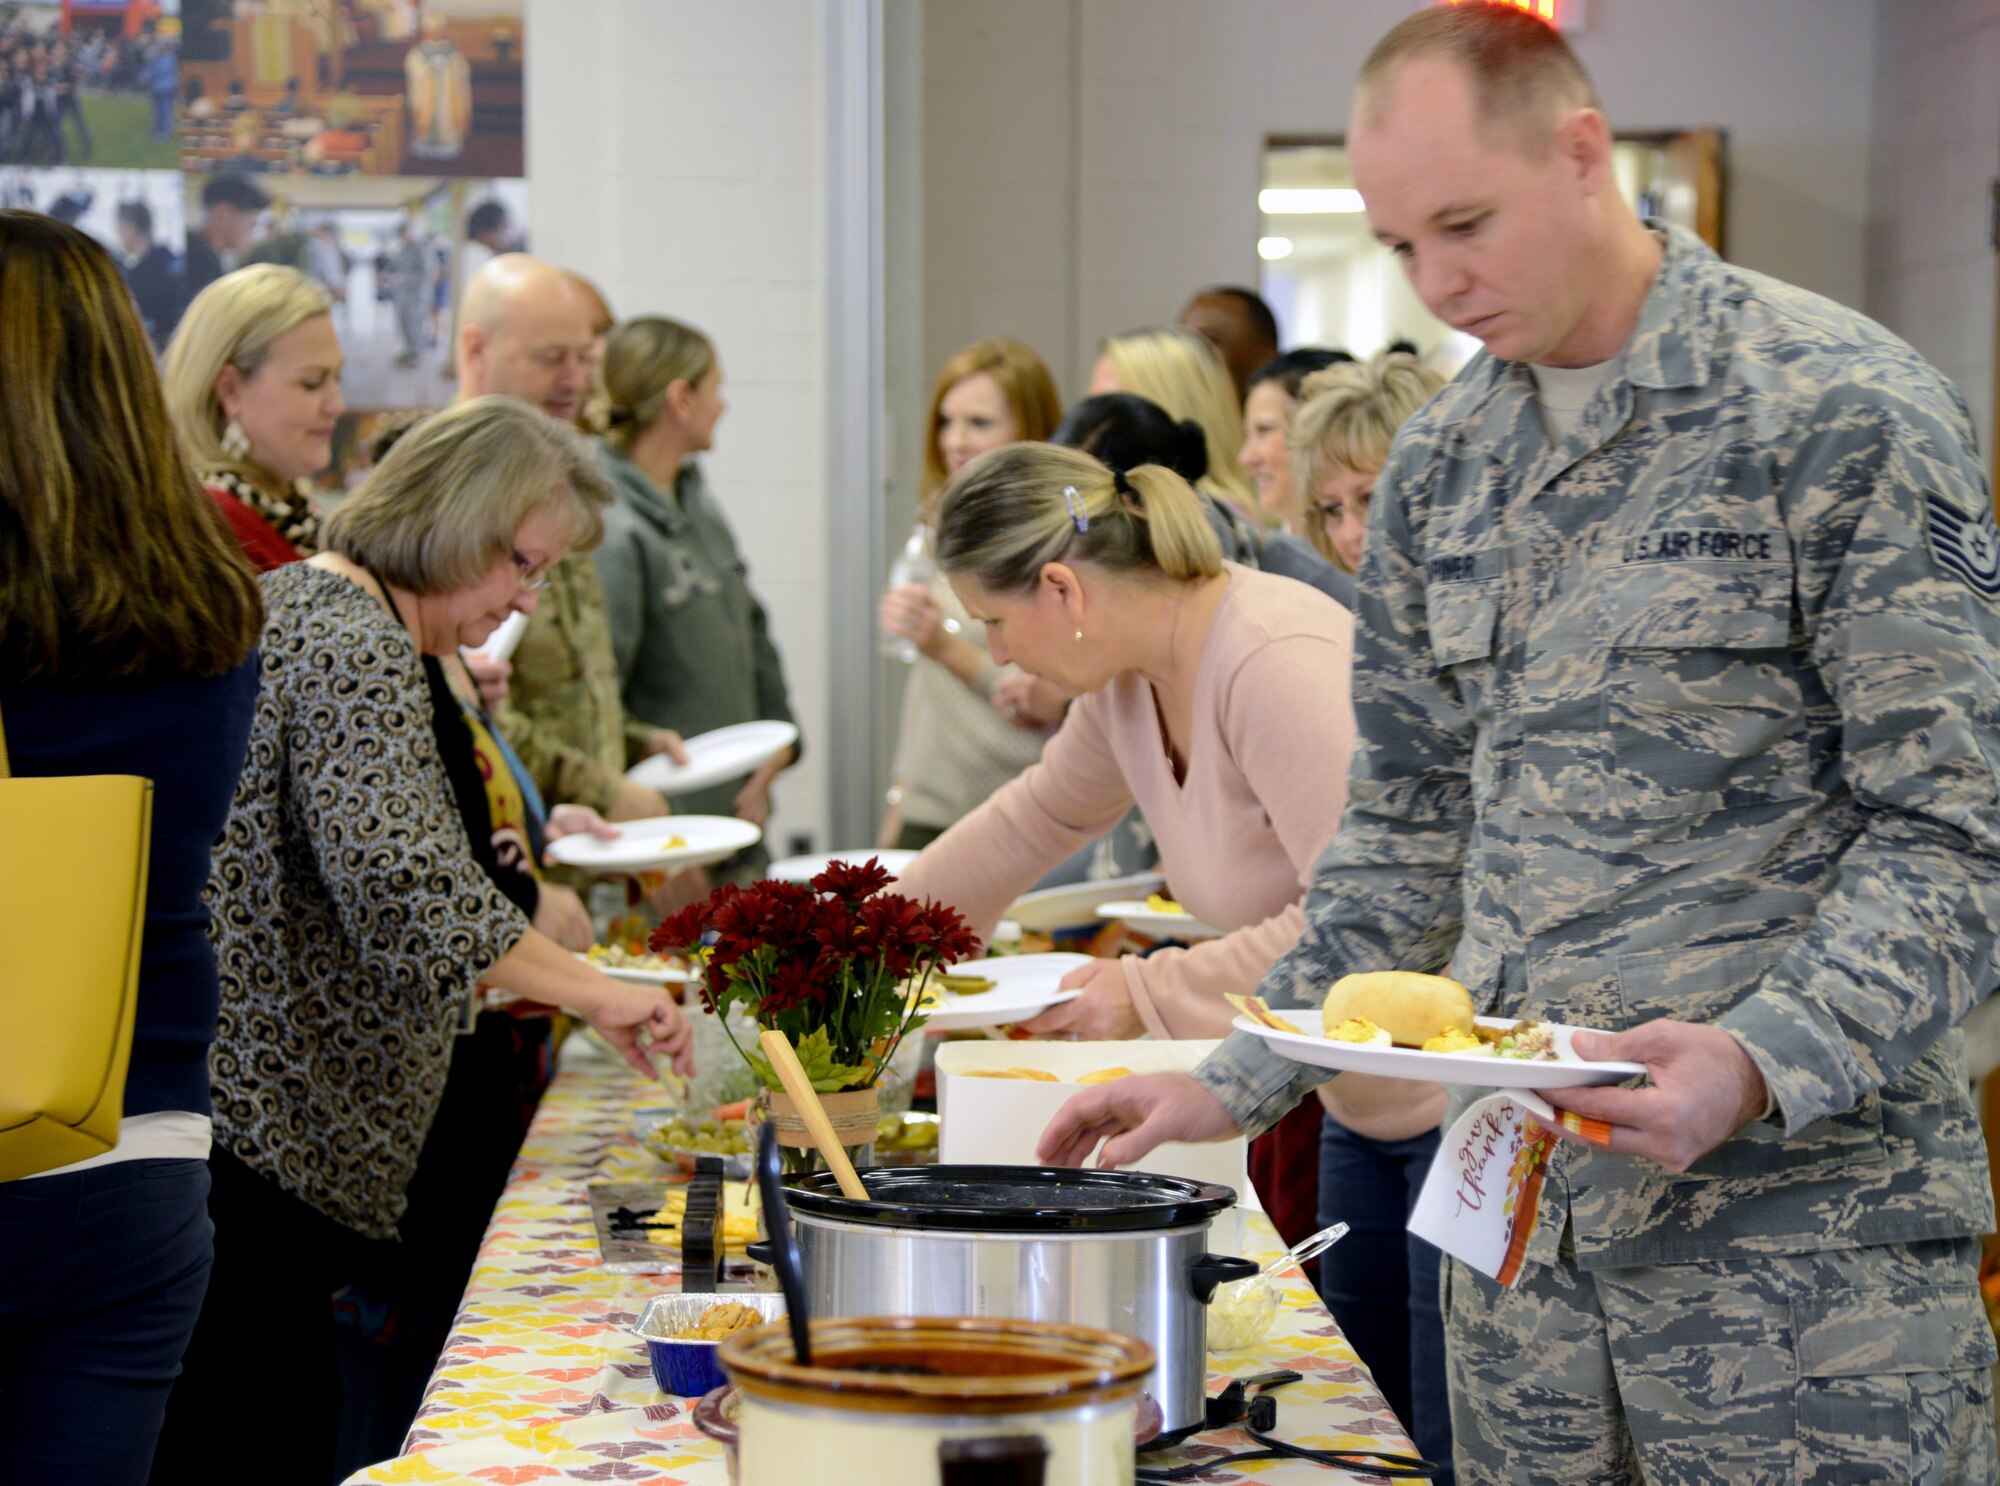 Members of the 72nd Air Base Wing gathered together at the Tinker Chapel for a Thanksgiving potluck feast Nov. 13. 72nd Air Base Wing Commander Col. Kenyon Bell thanked everyone for their hard work and dedication to the mission during the year and reminded them to look out for one another and be good Wingmen during this holiday season.